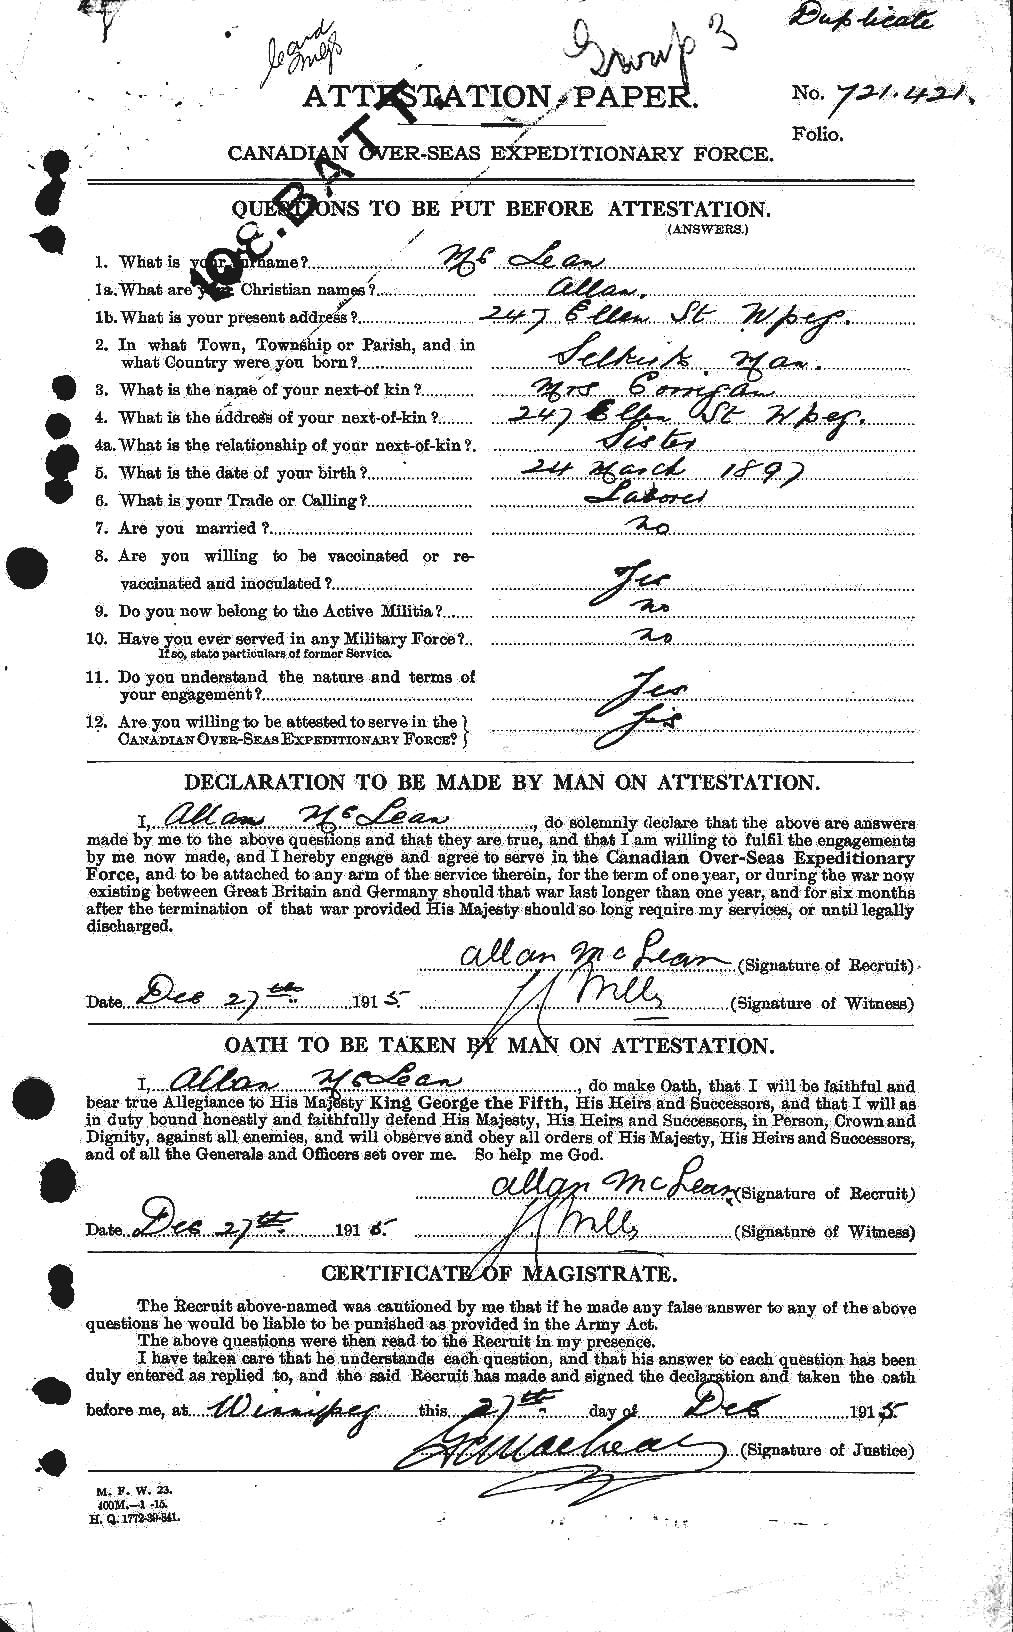 Personnel Records of the First World War - CEF 532776a